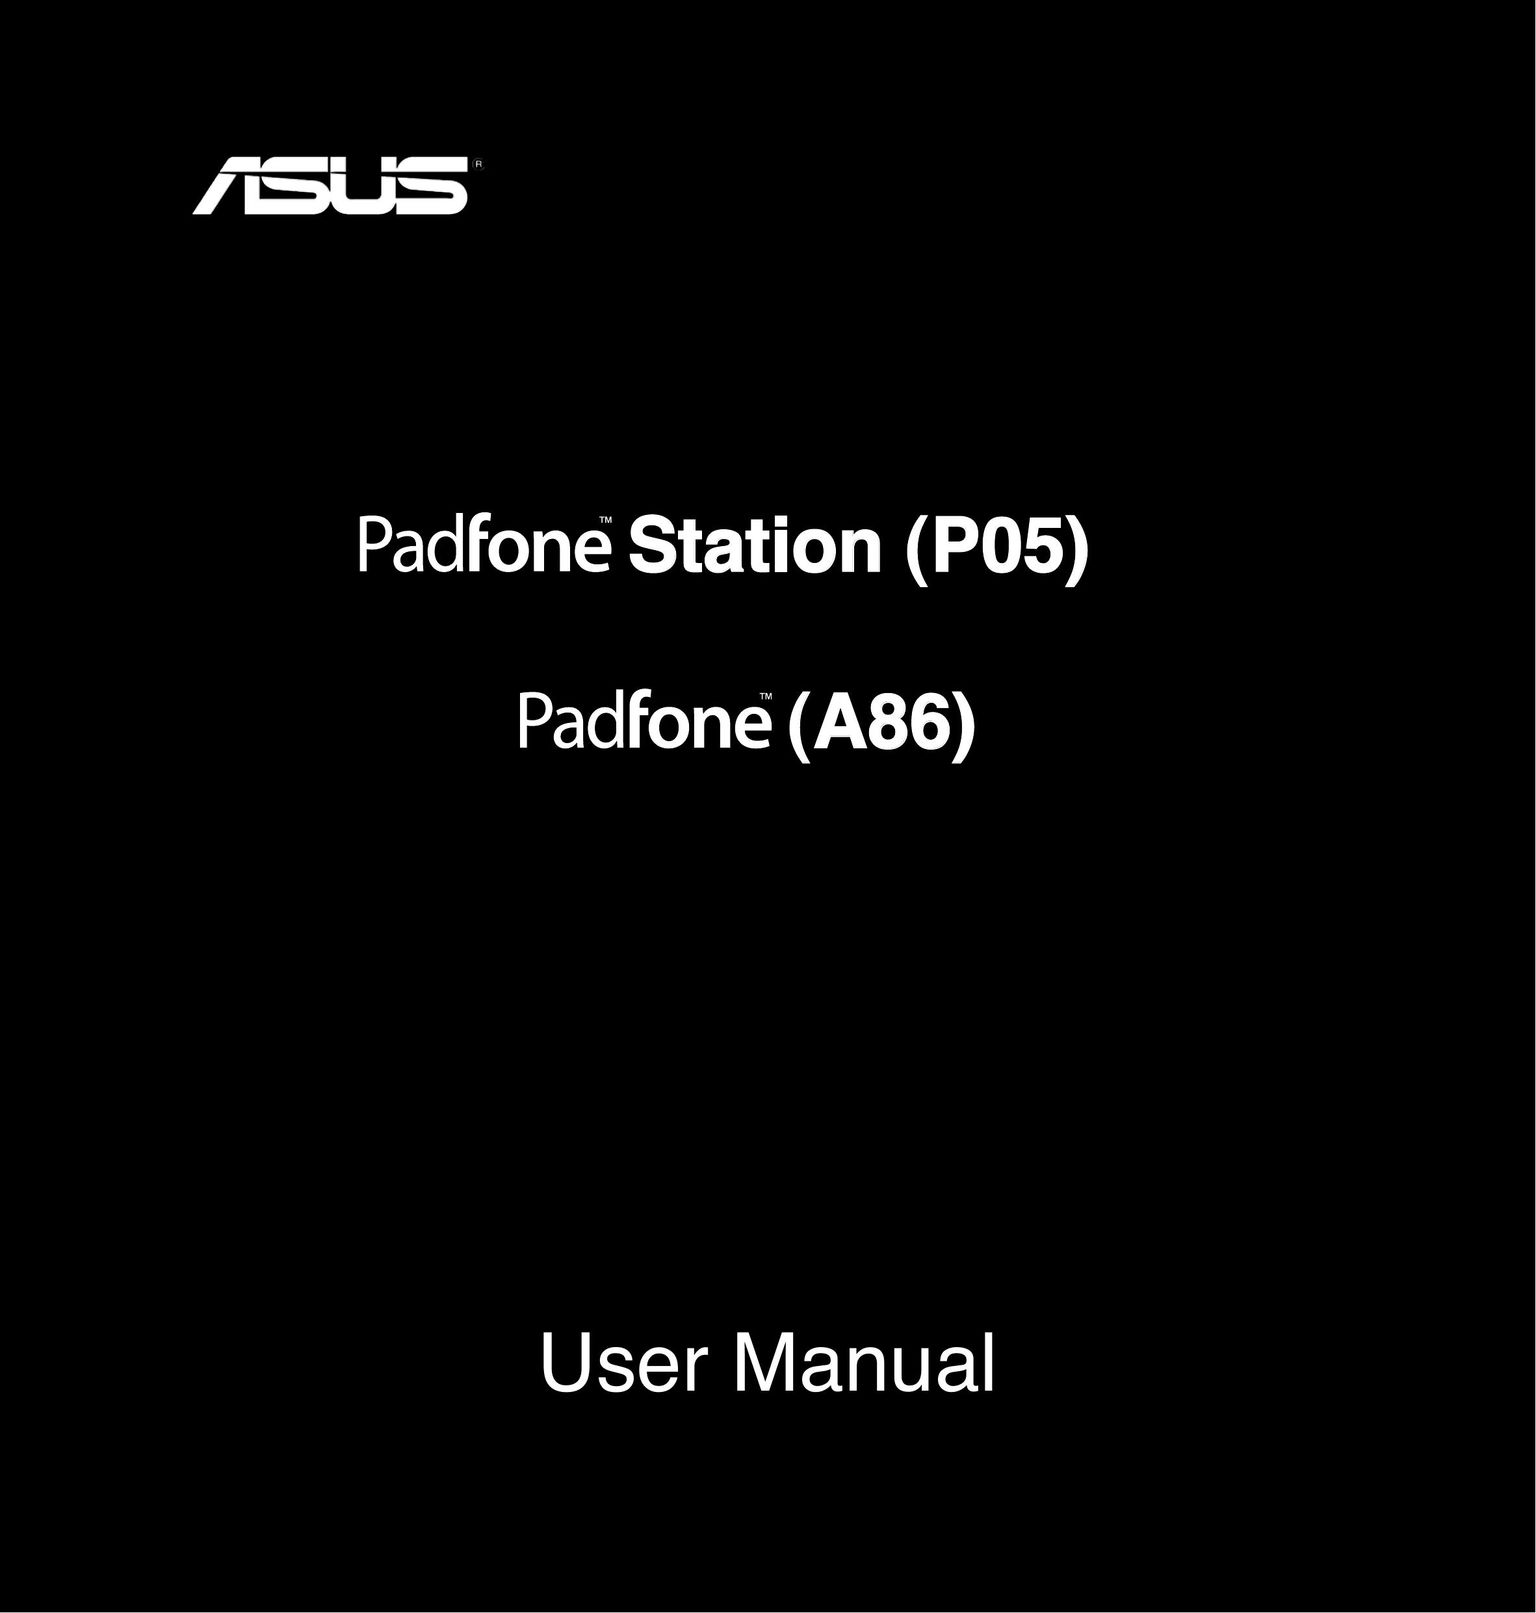 Asus A86 Telephone Accessories User Manual